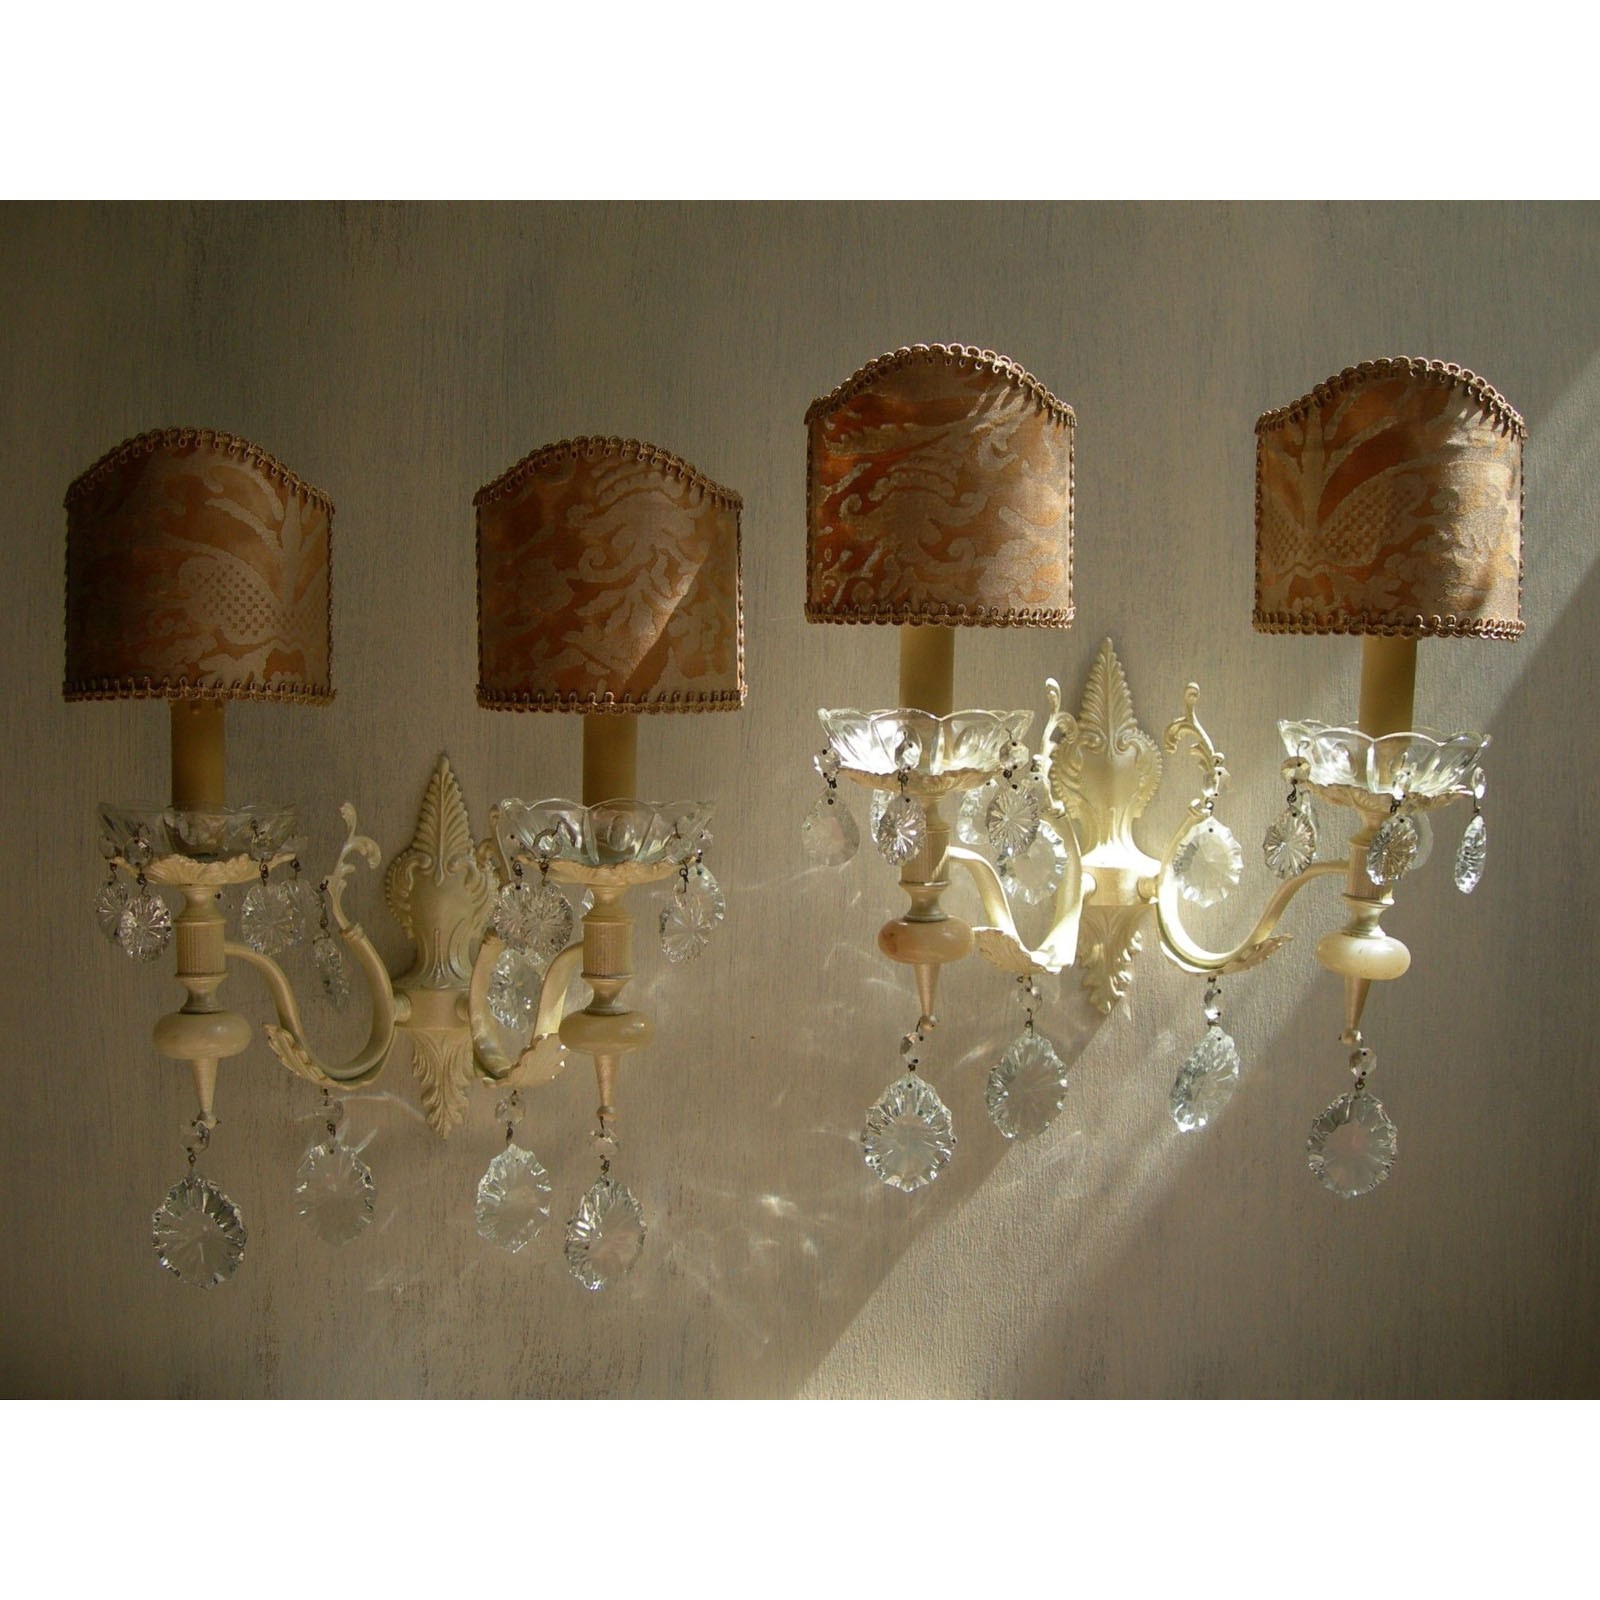 PAIR CHANDELIER CRYSTAL WALL LAMP SHADES ART DECO BRONZE SCONCE . 